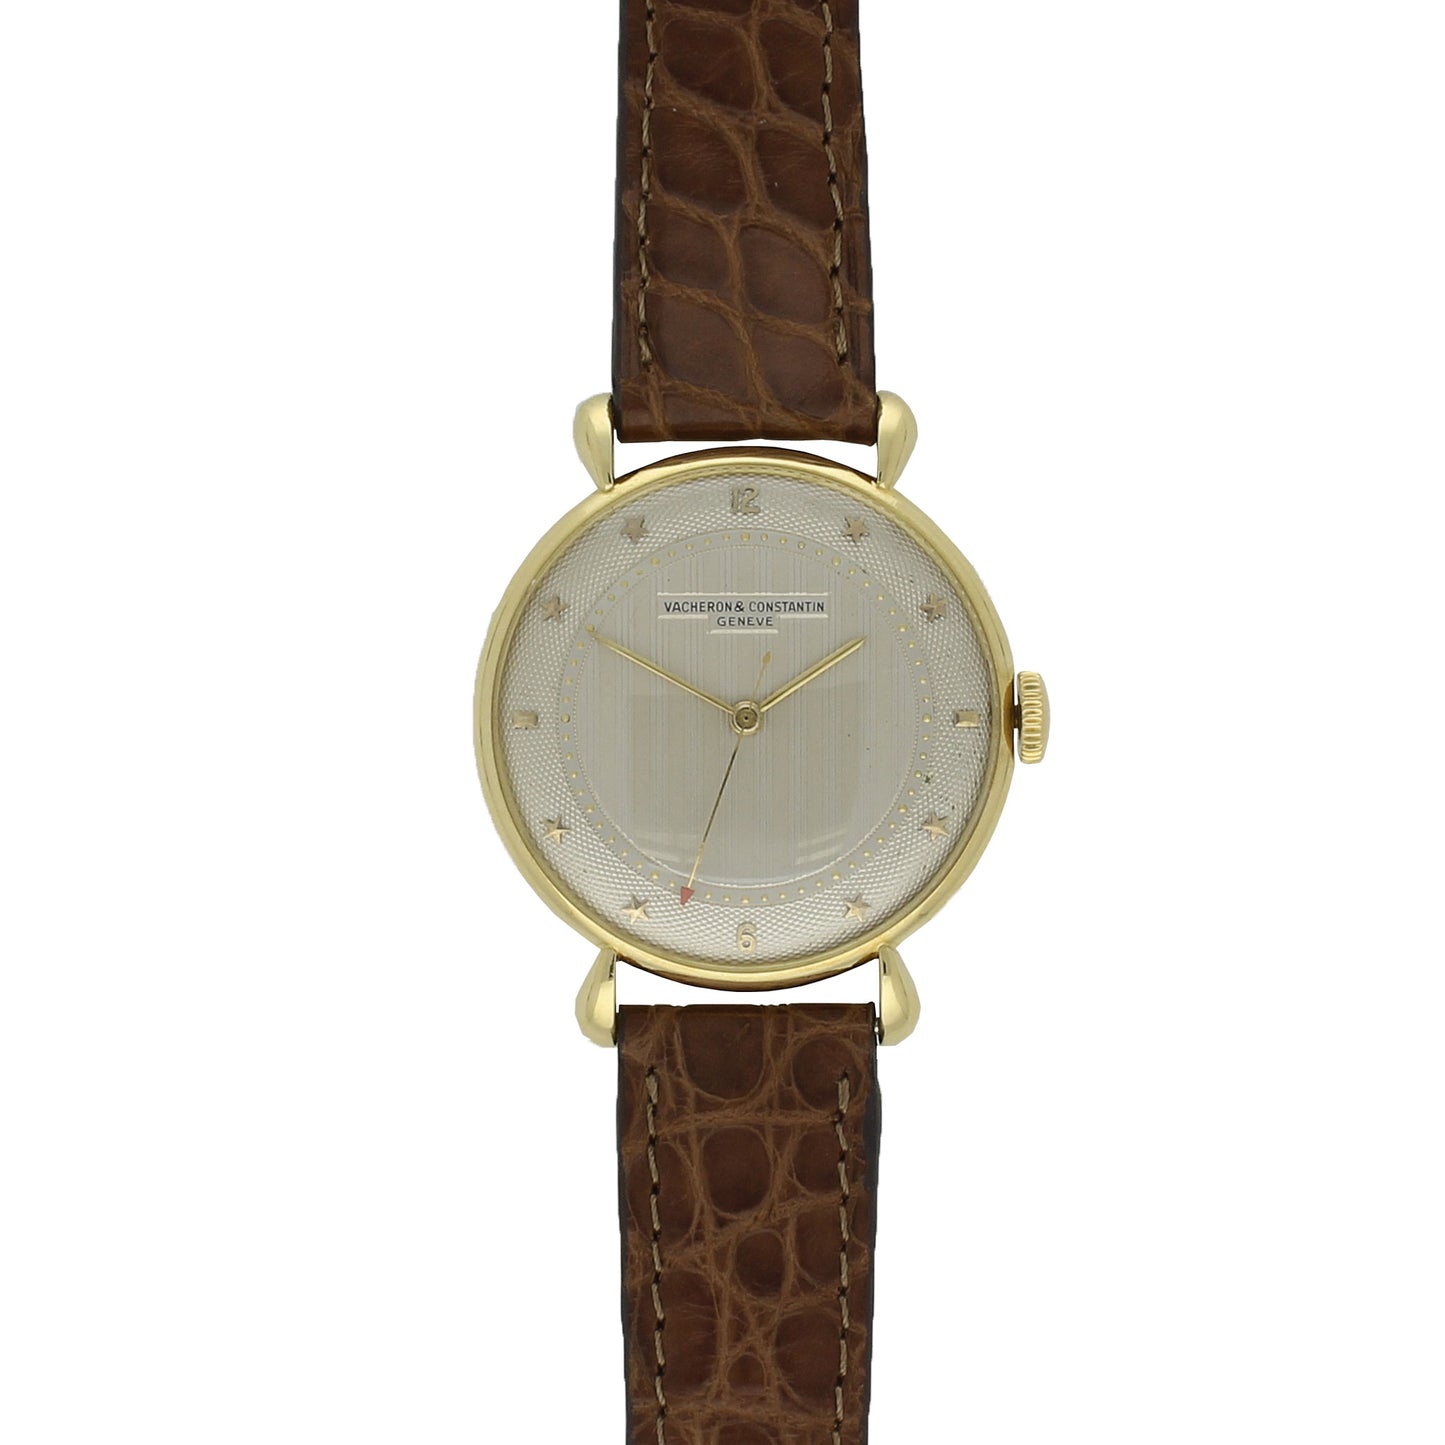 18ct yellow gold, reference 4218 wristwatch. Made1948